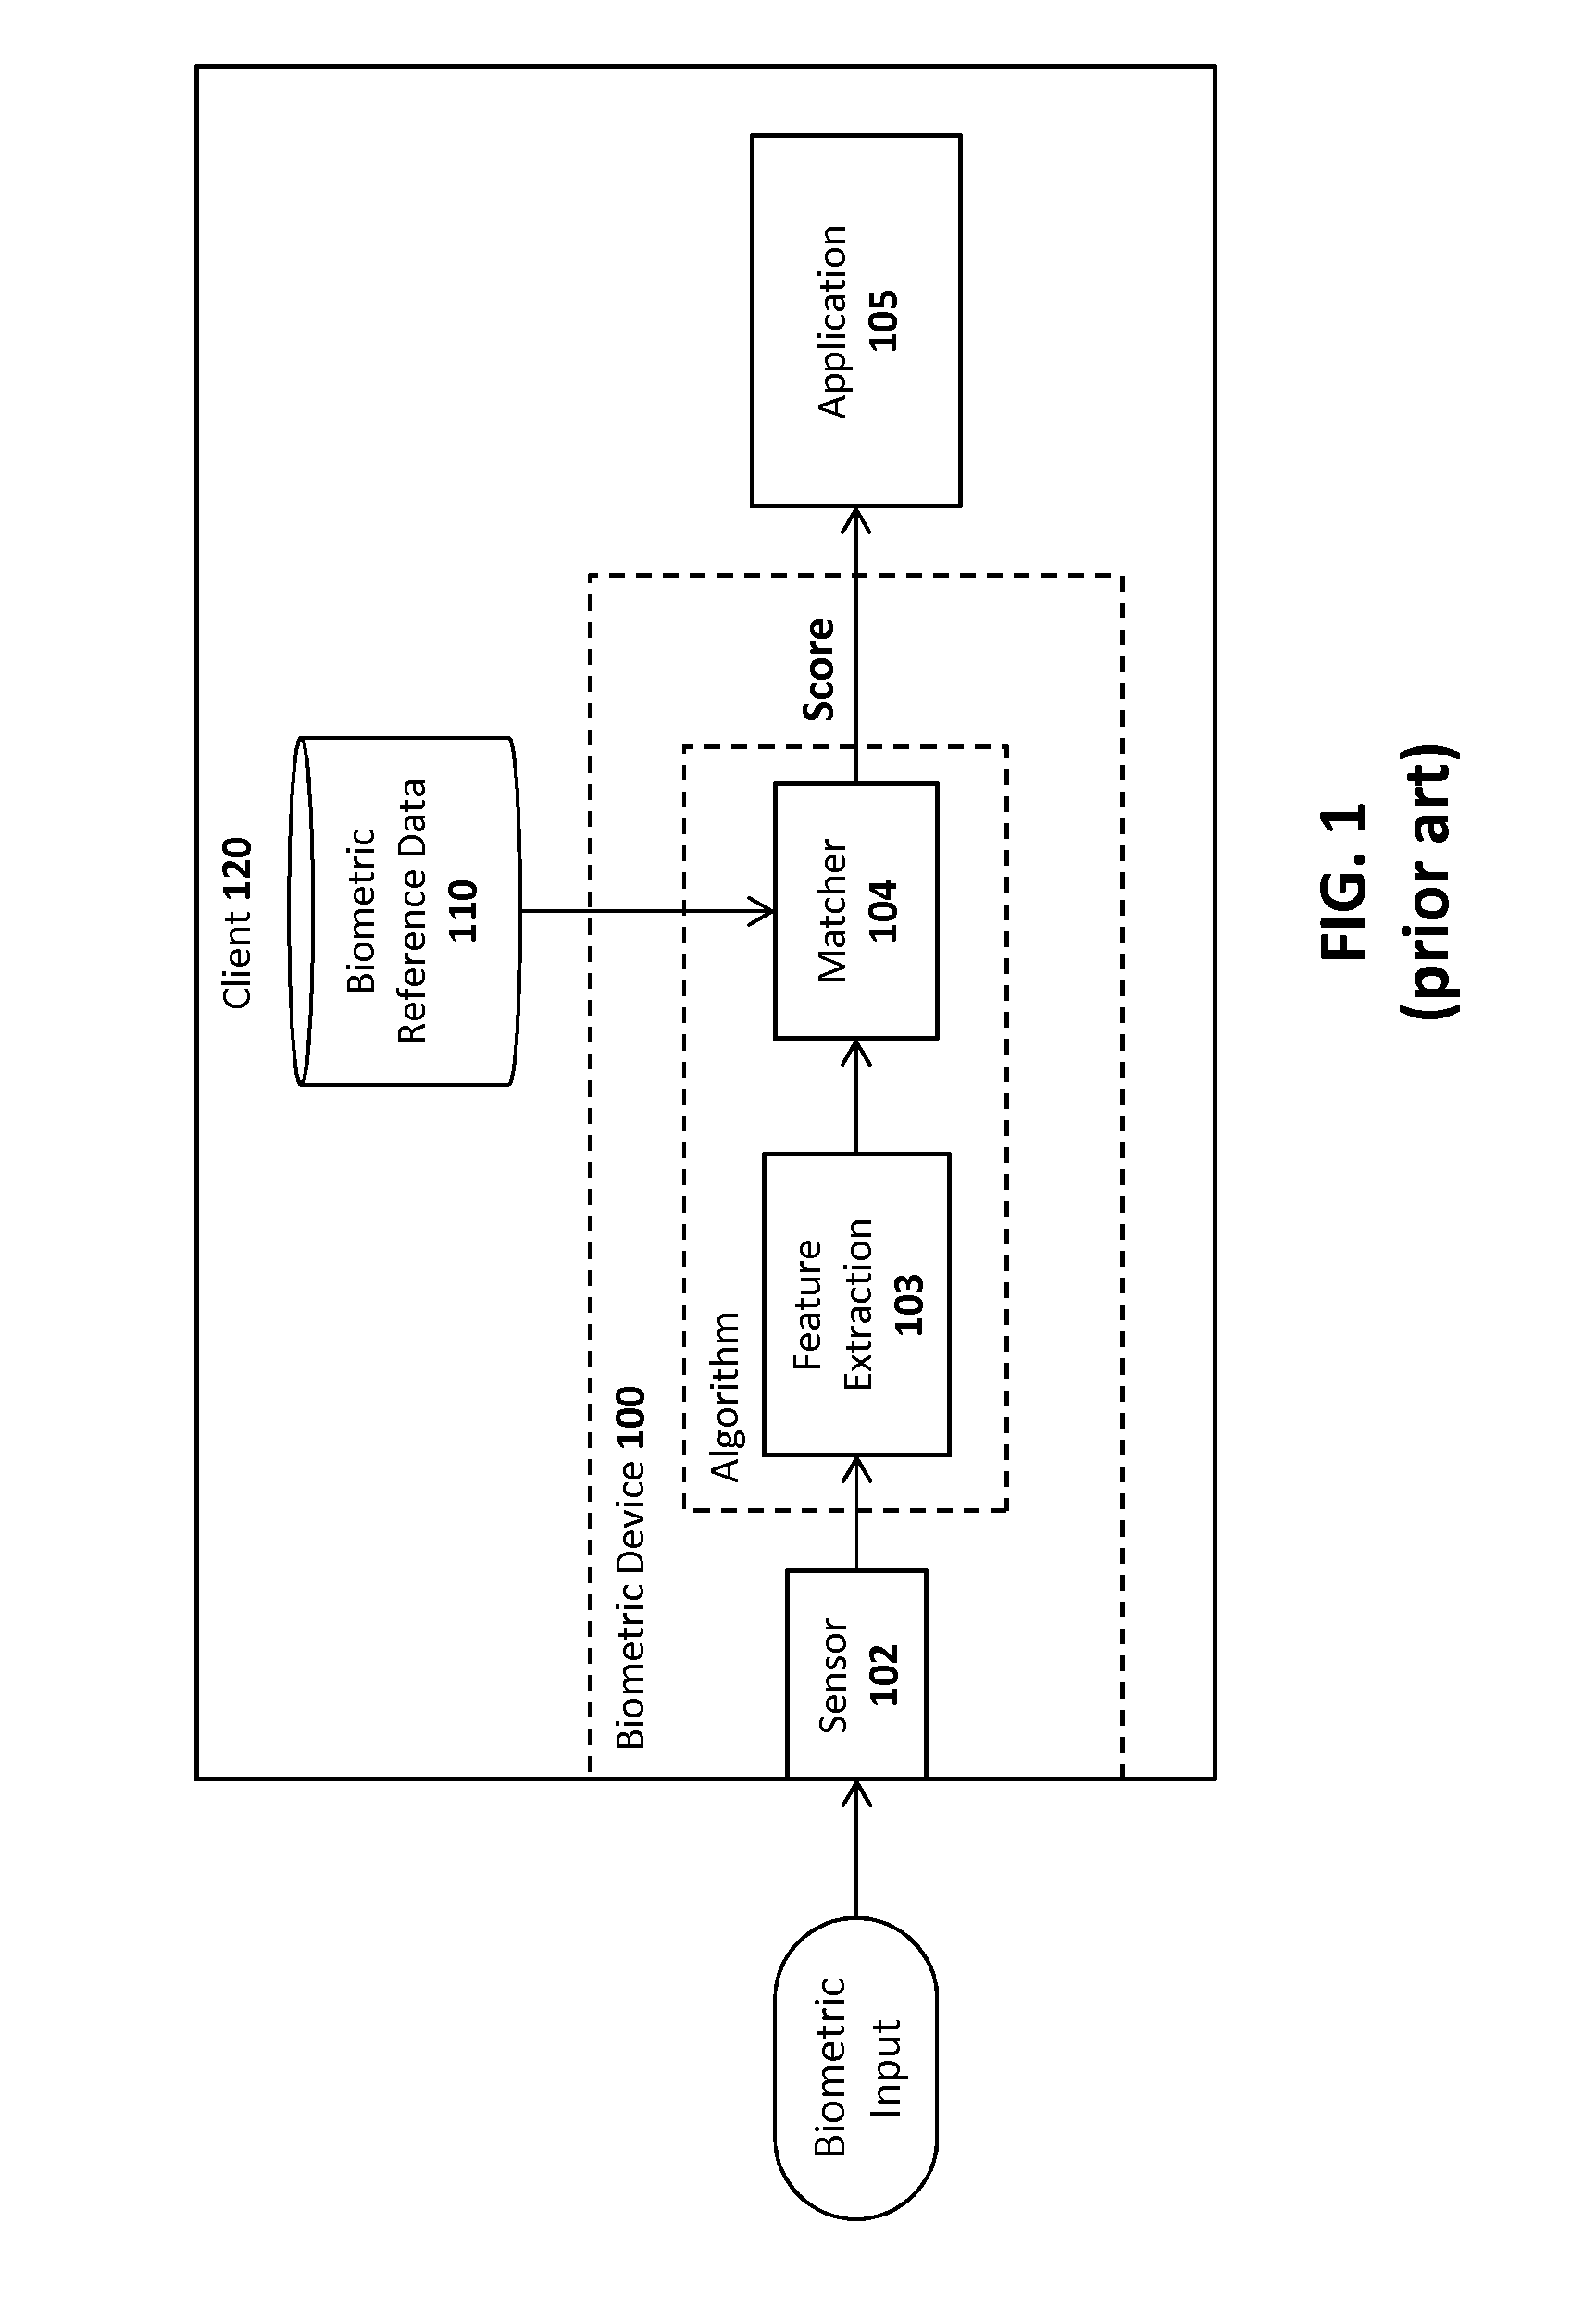 System and method for adaptive application of authentication policies